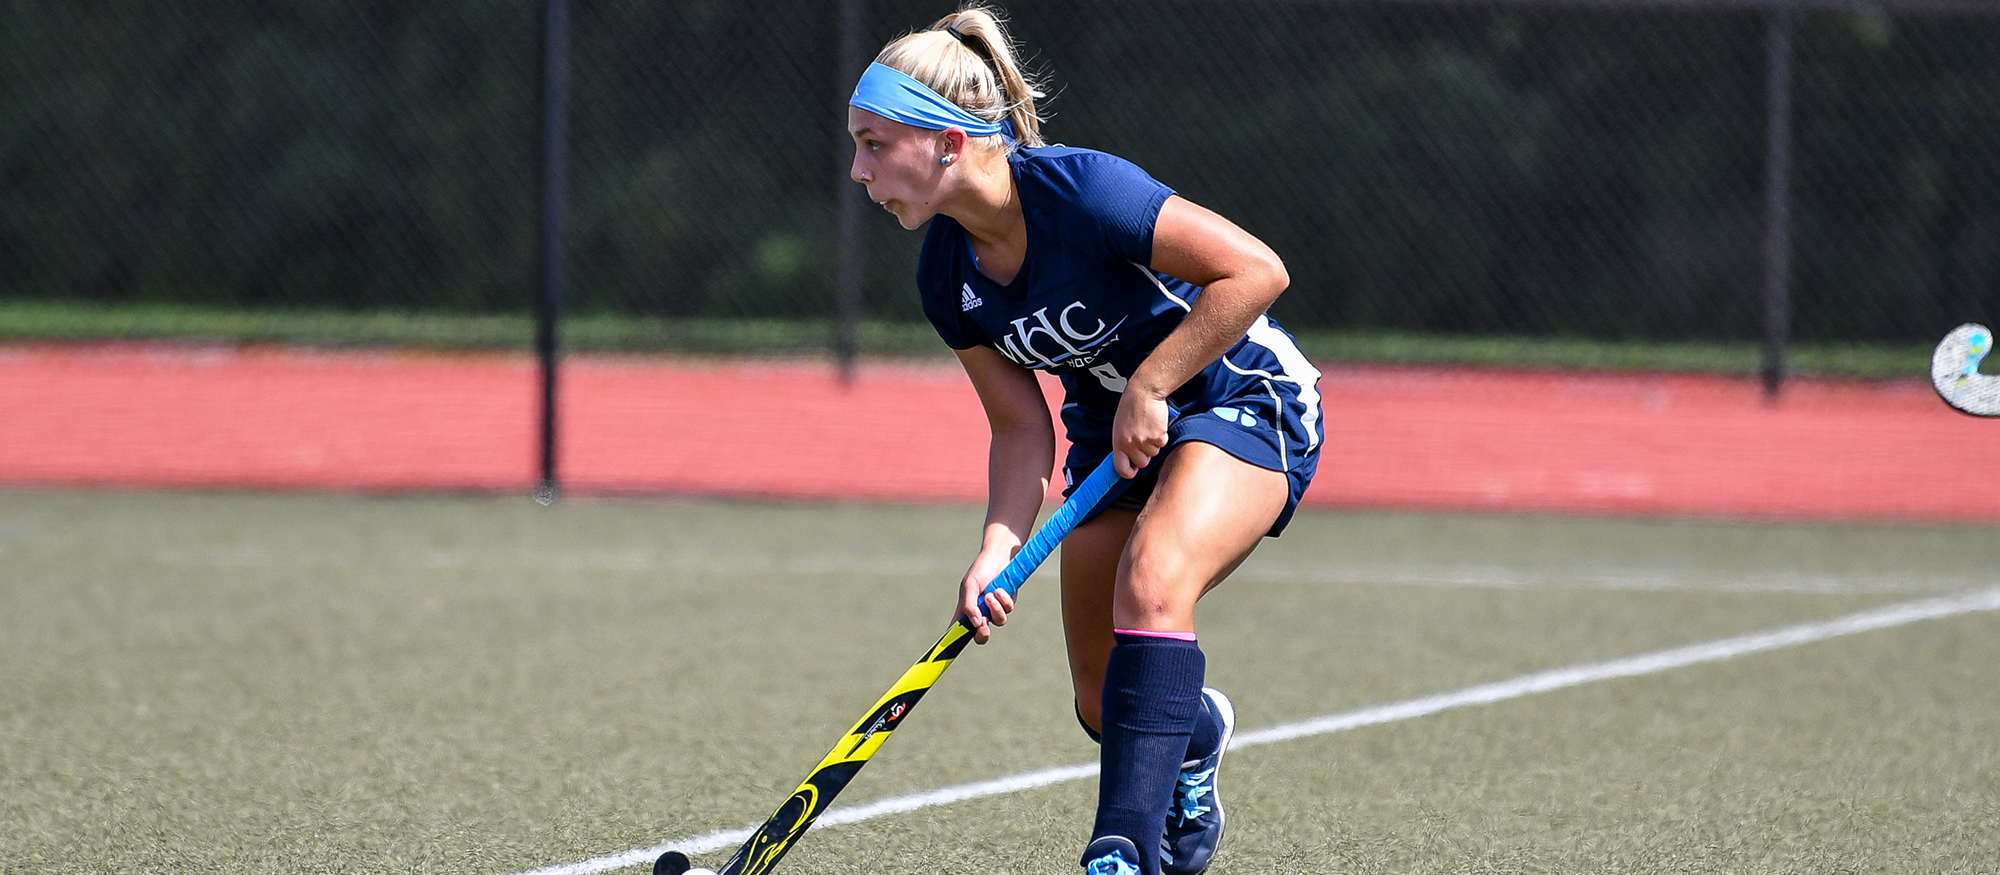 Lawrence's Hat Trick Lifts Field Hockey Past Western New England, 4-2